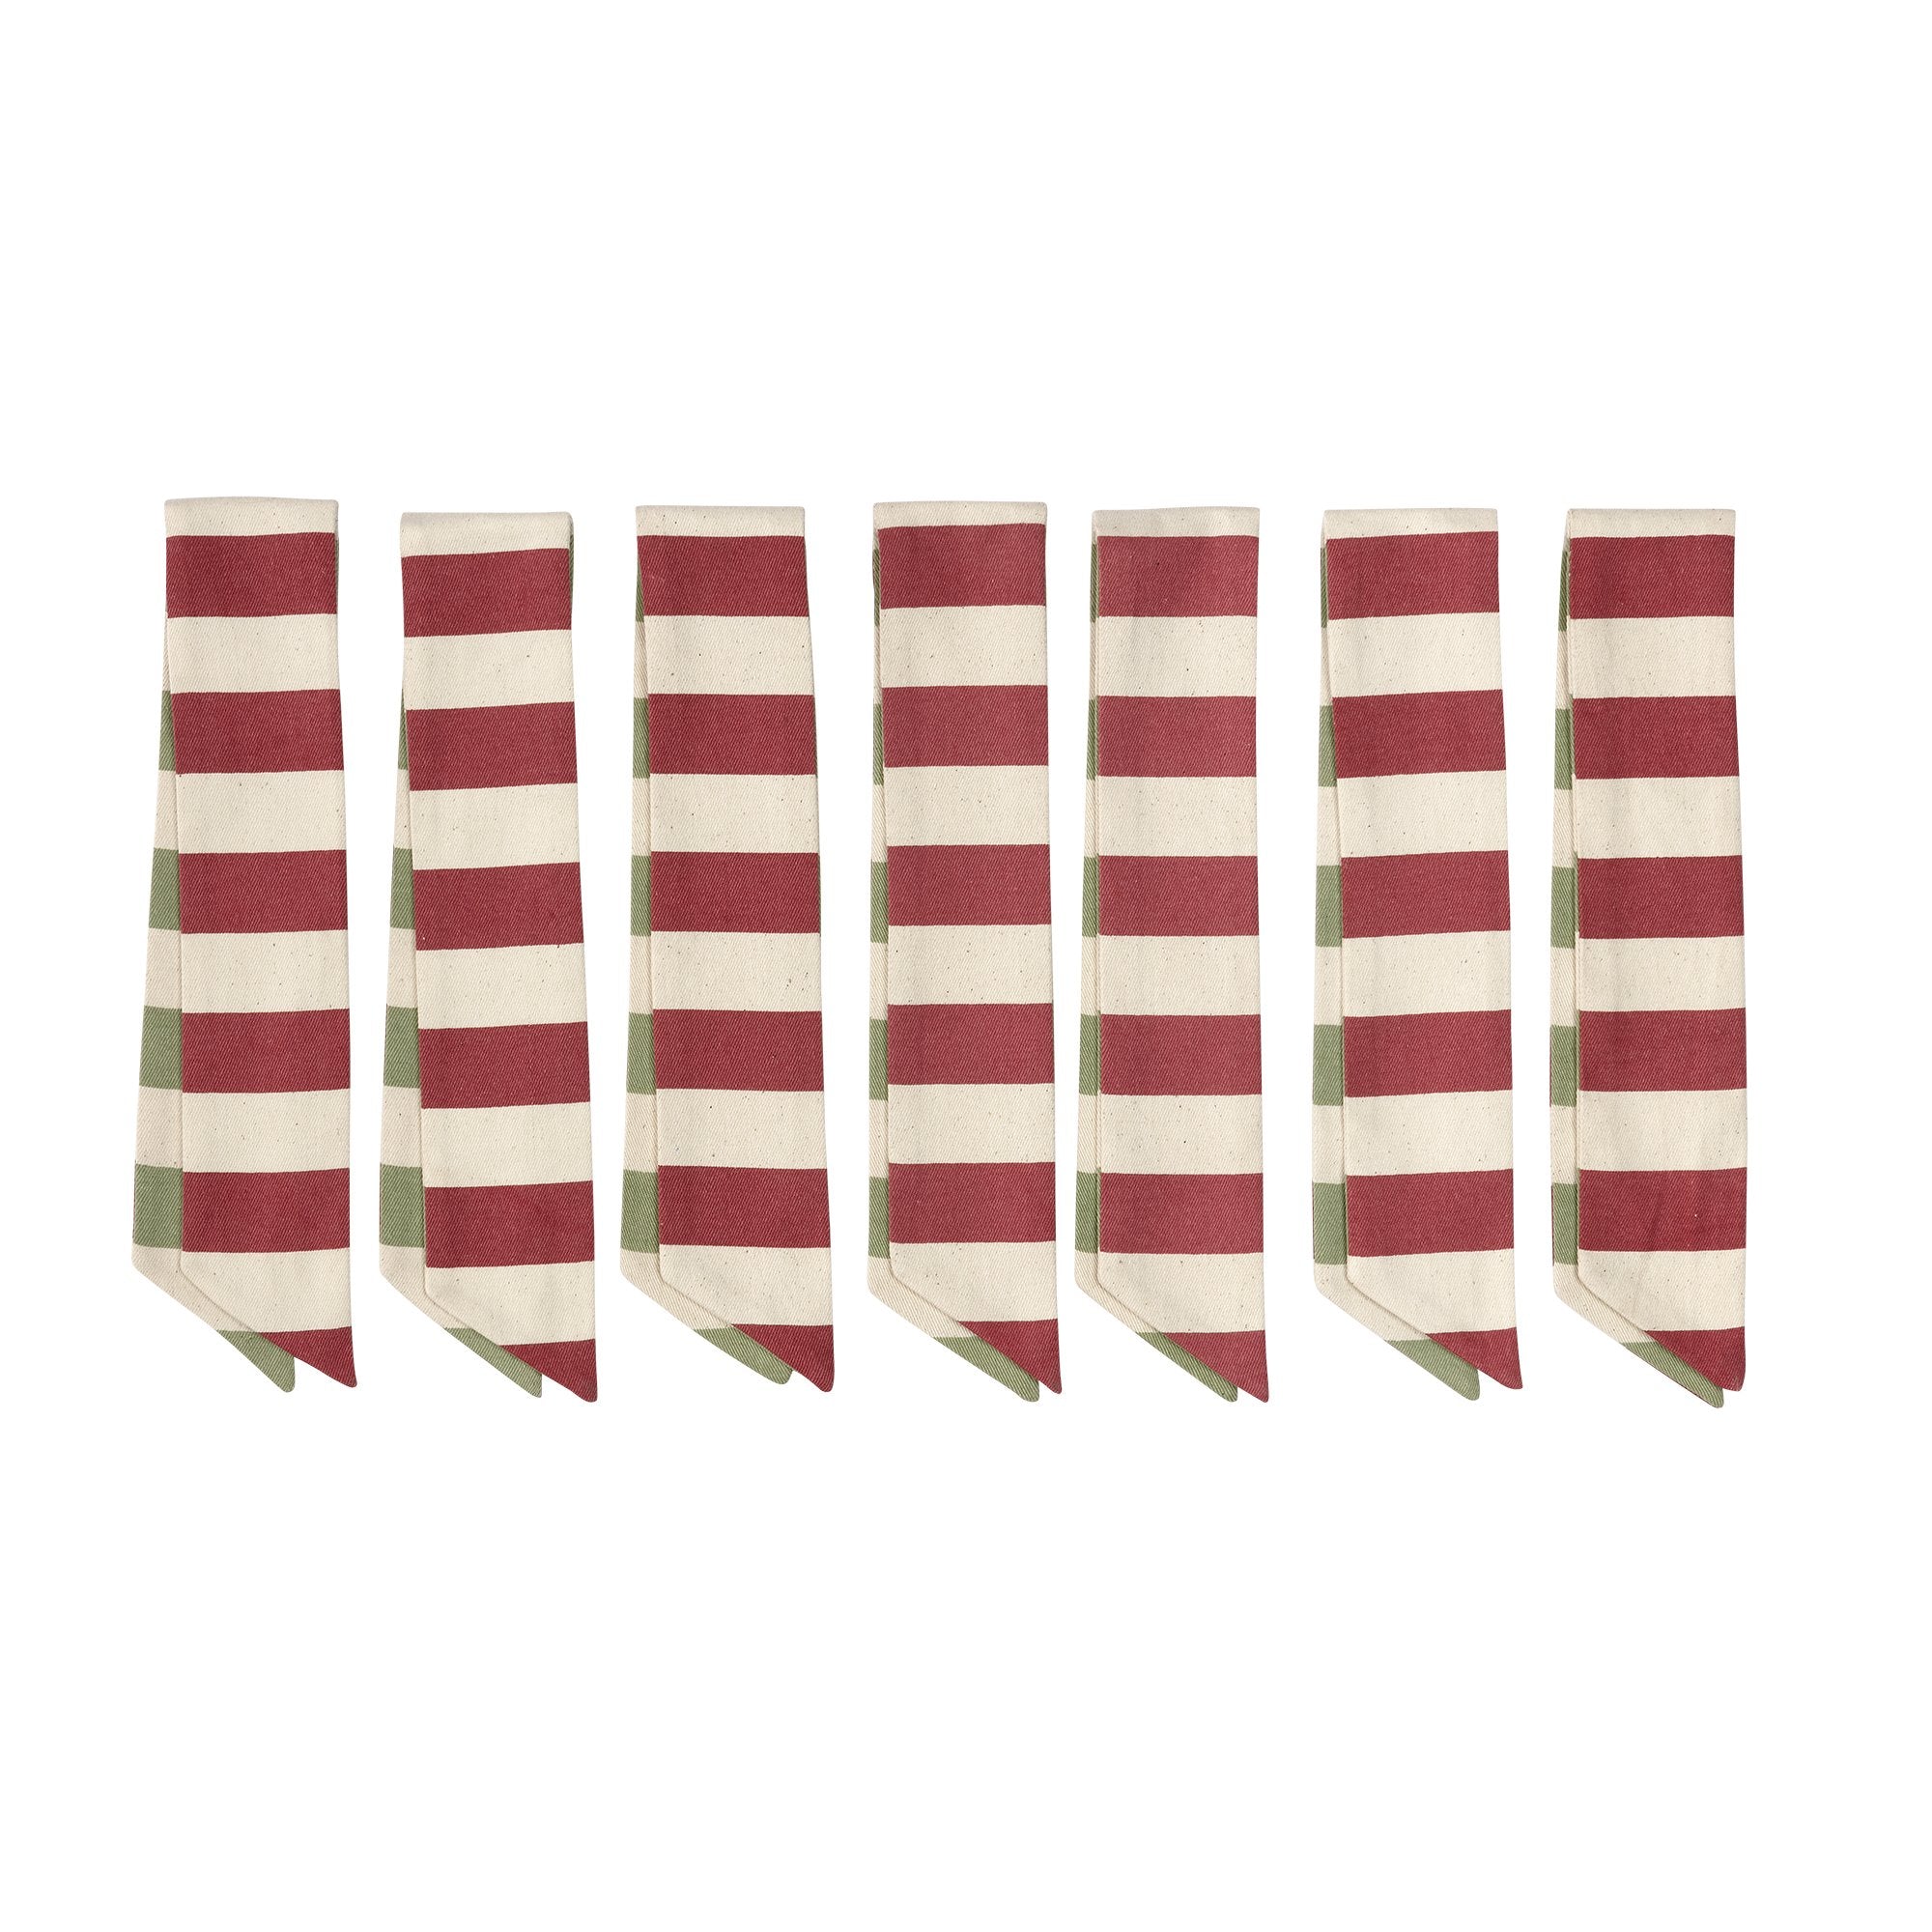 Candy Cane Ties - Set of 8 - Alice Palmer & Co